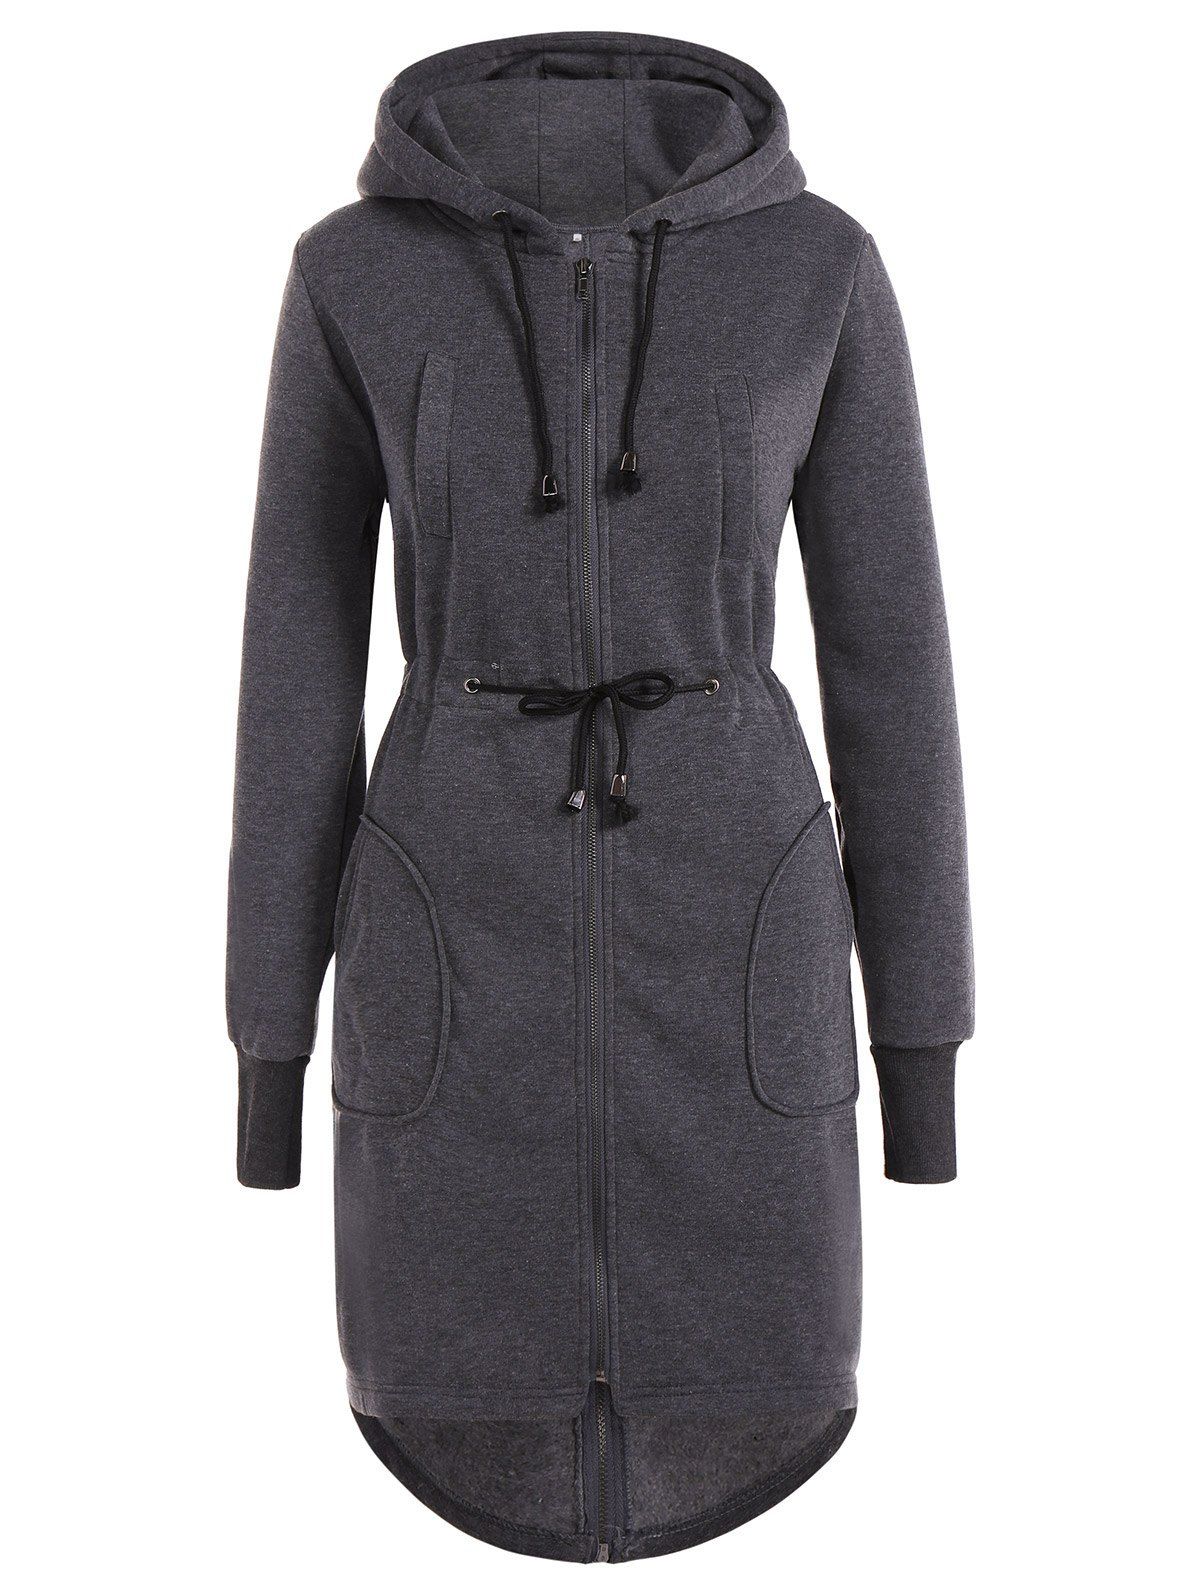 [35% OFF] 2021 Drawstring Hooded Coat With Pockets In GRAY | DressLily